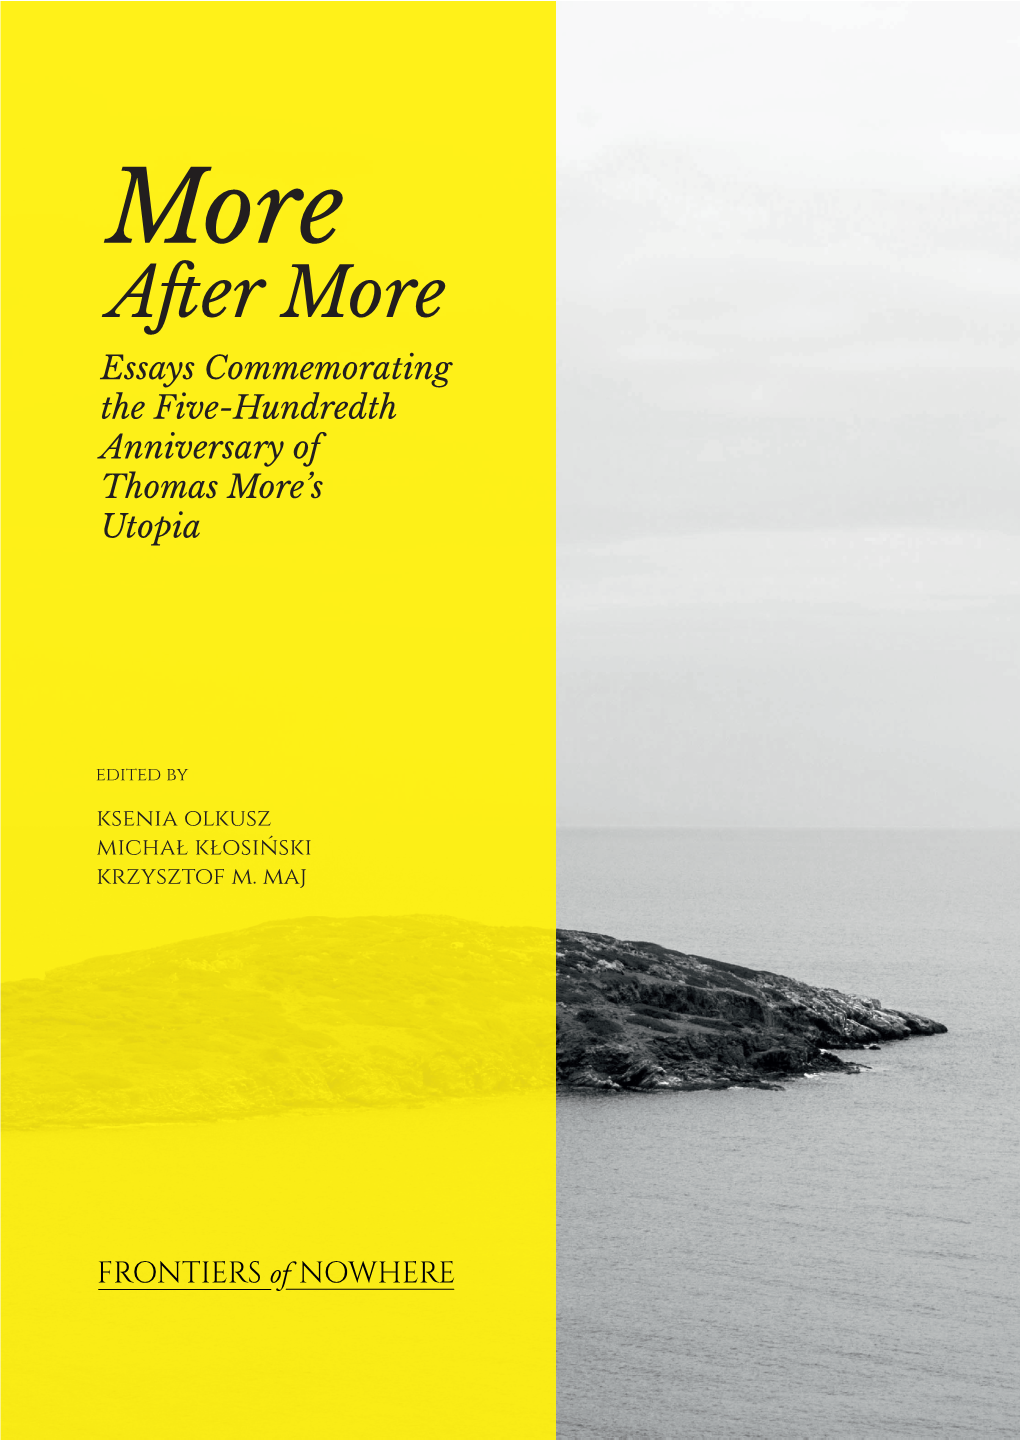 After More. Essays Commemorating the Five Hundredth Anniversary Of